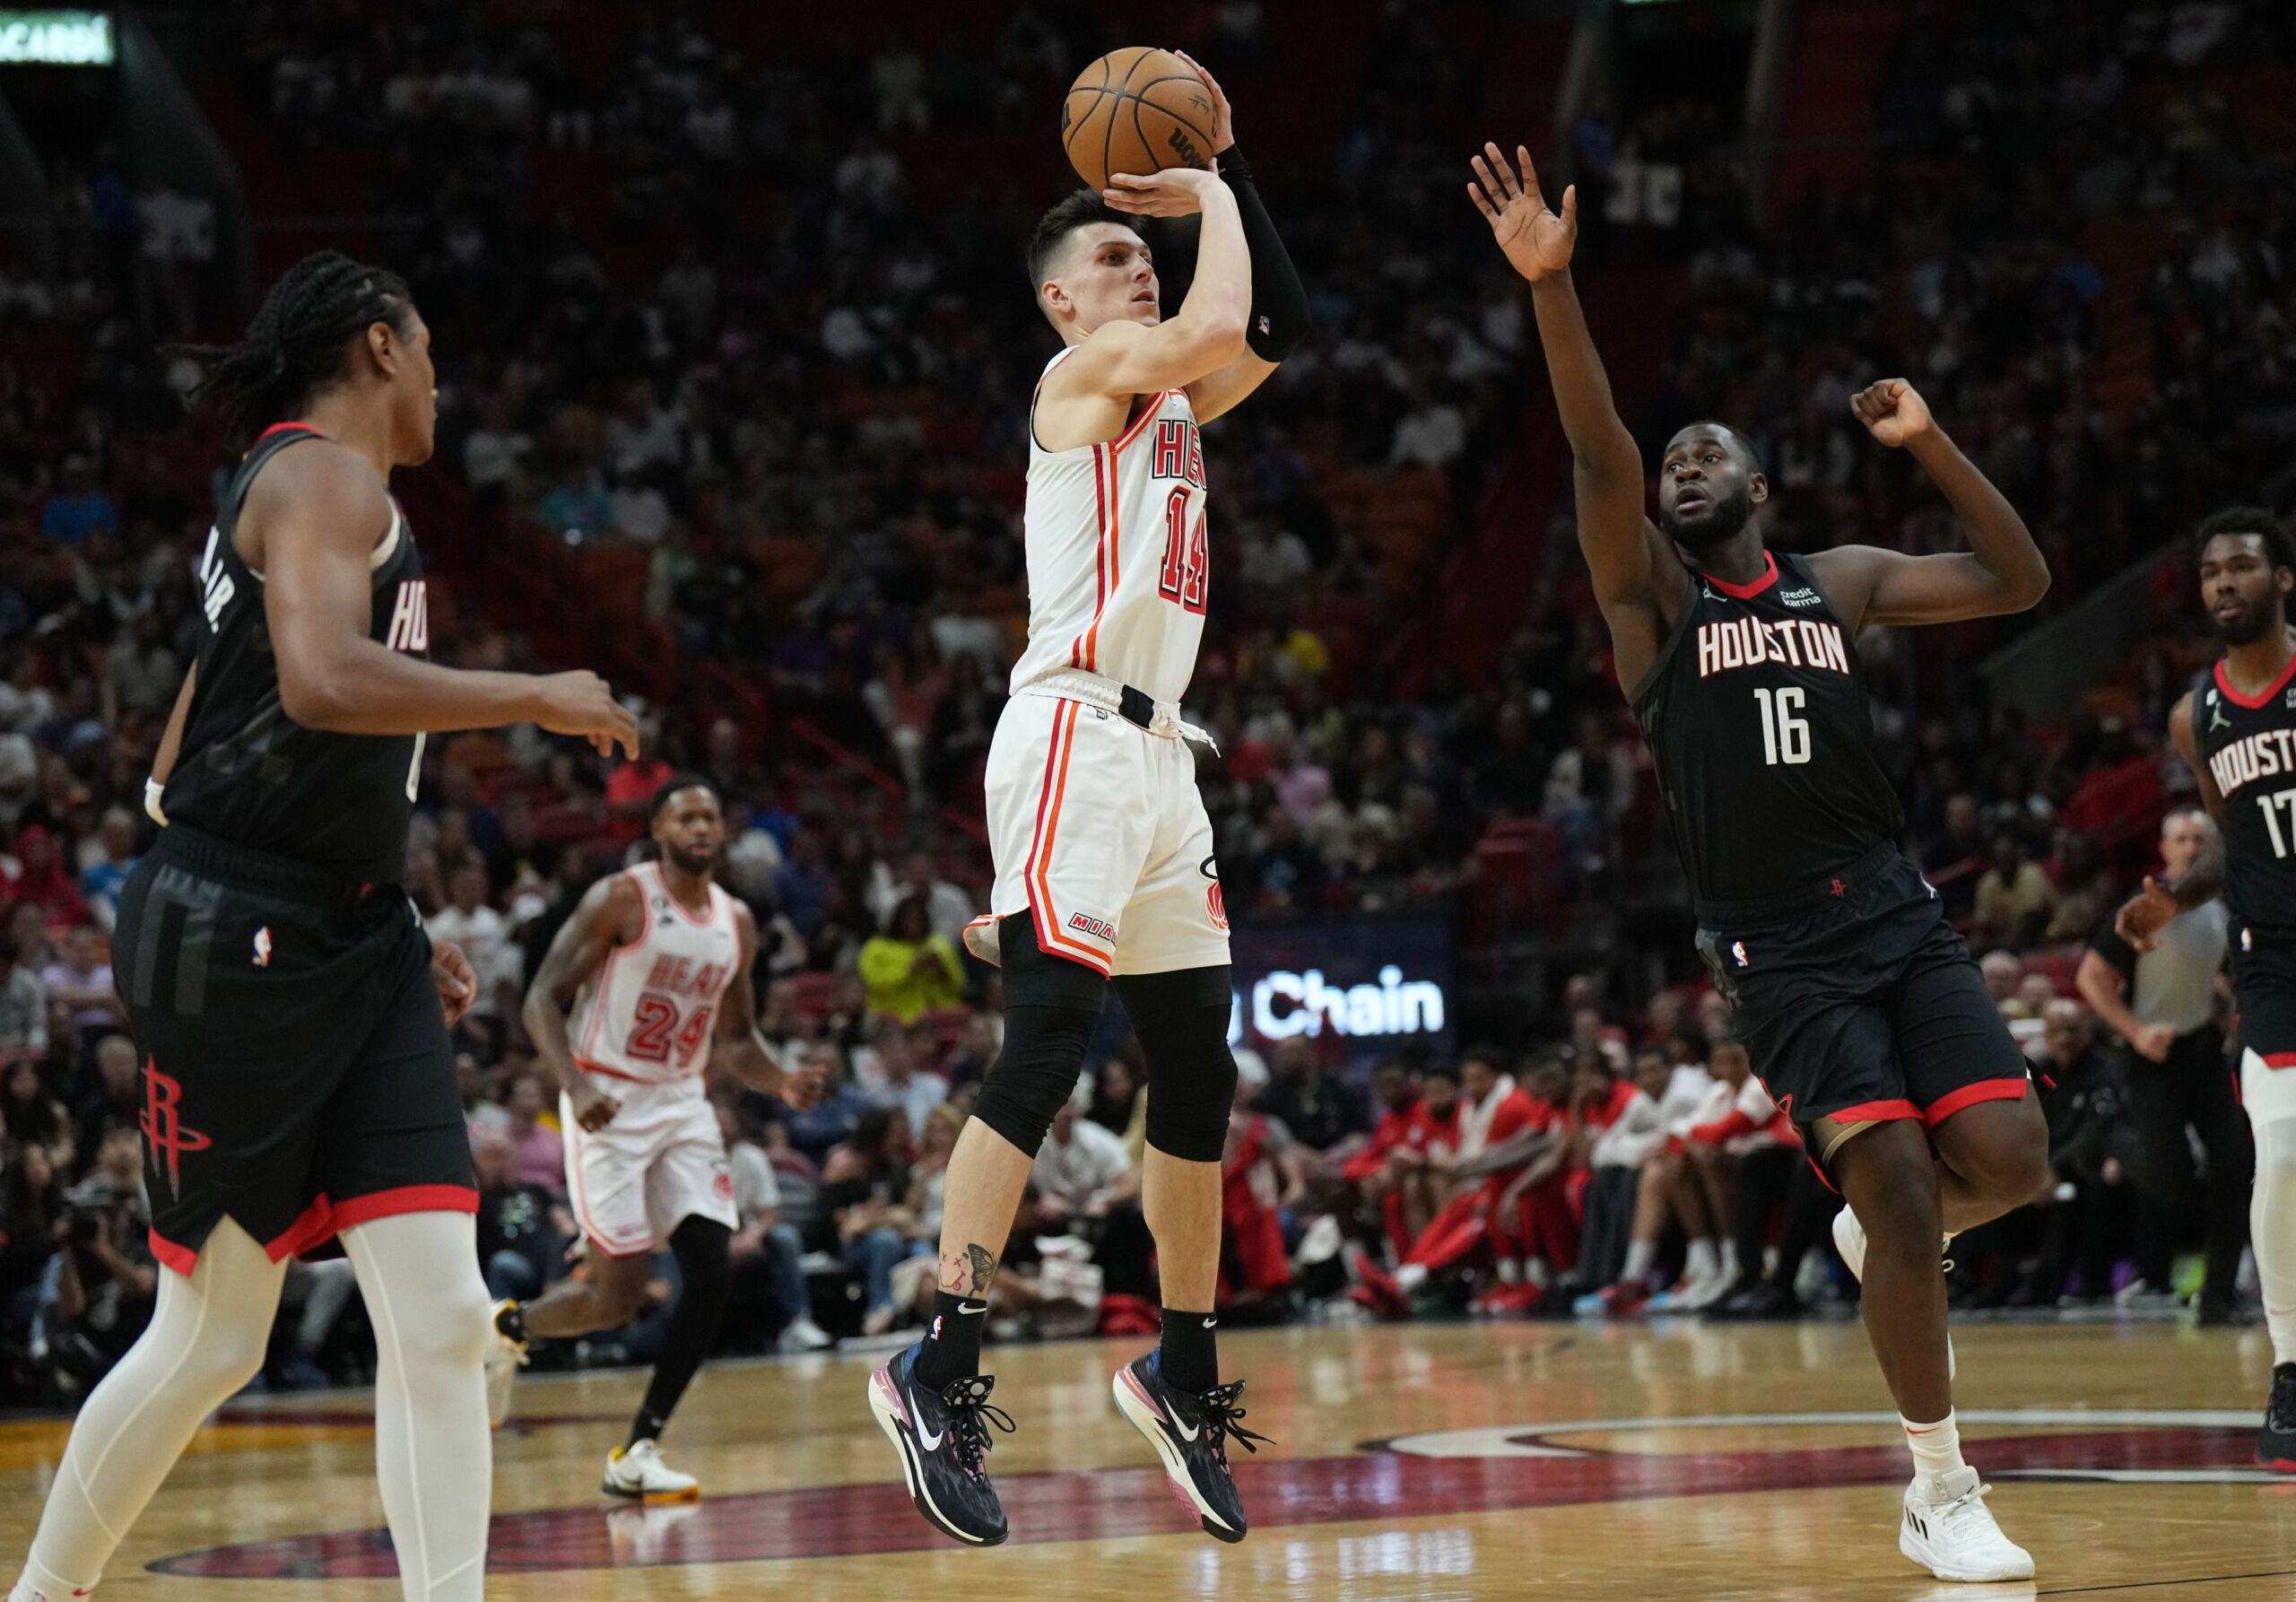 NBA Rumors: 3 teams who should try to trade for Heat guard Tyler Herro